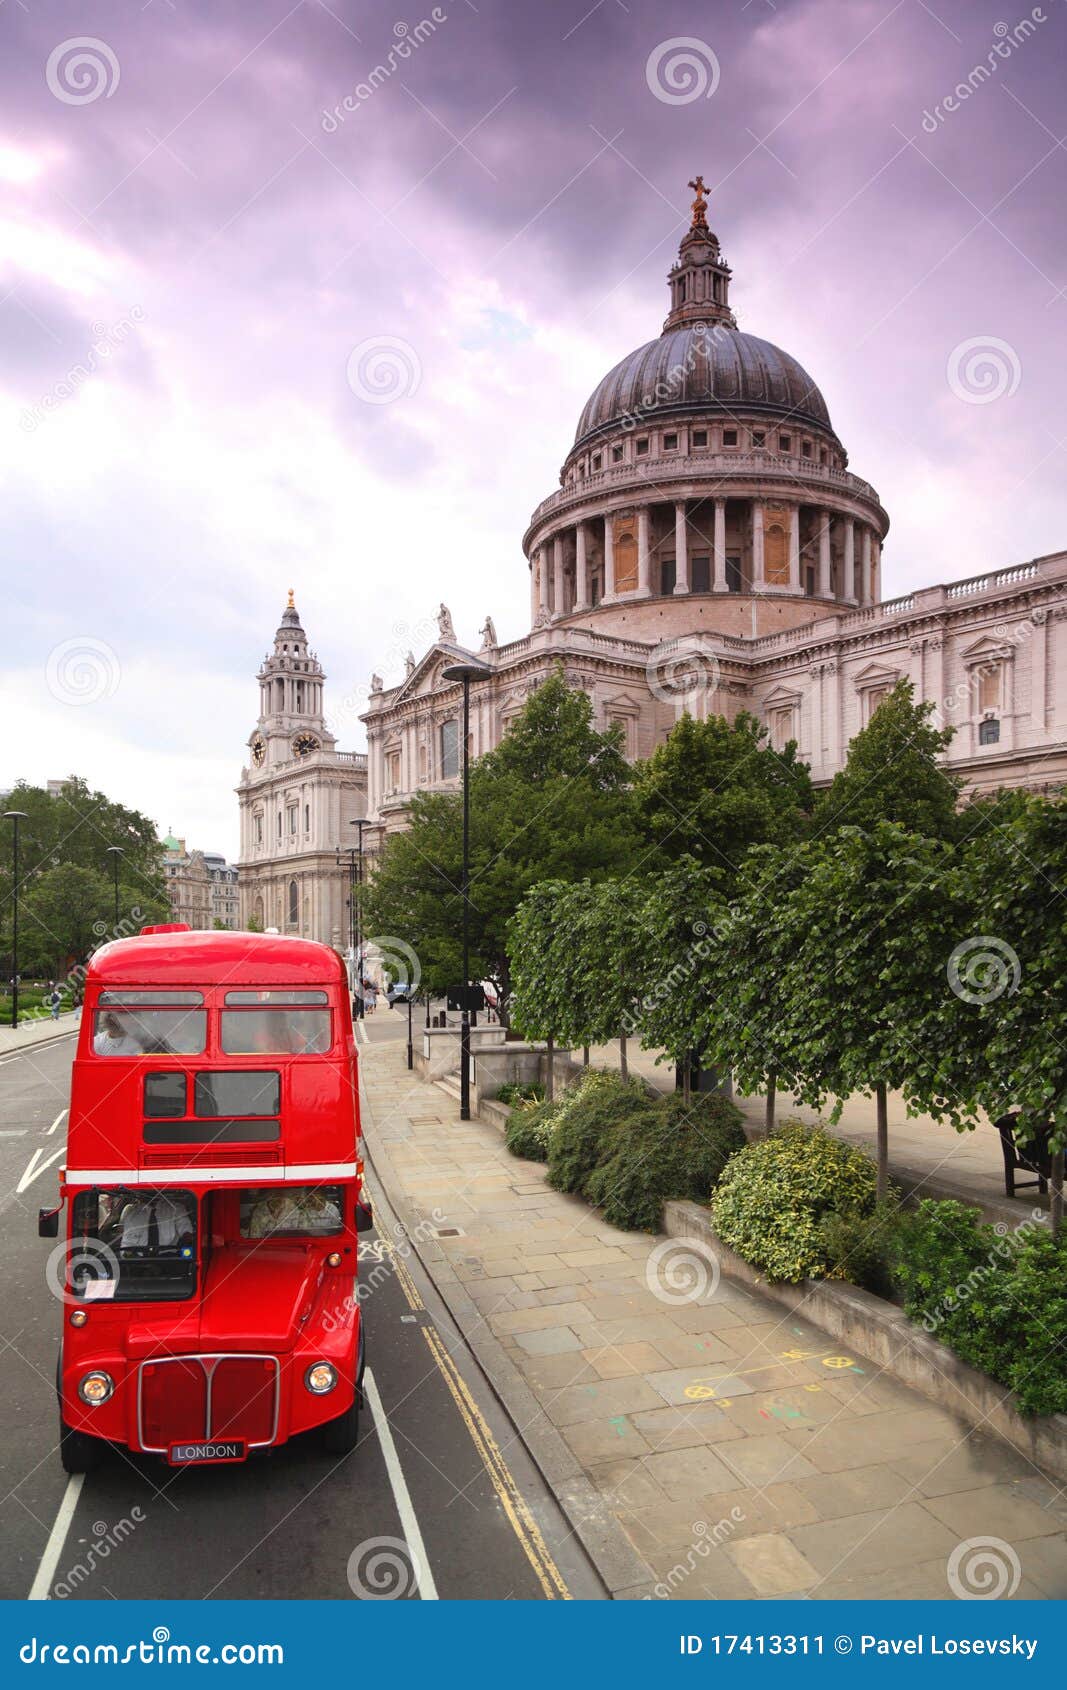 st. paul's cathedral and double-decker